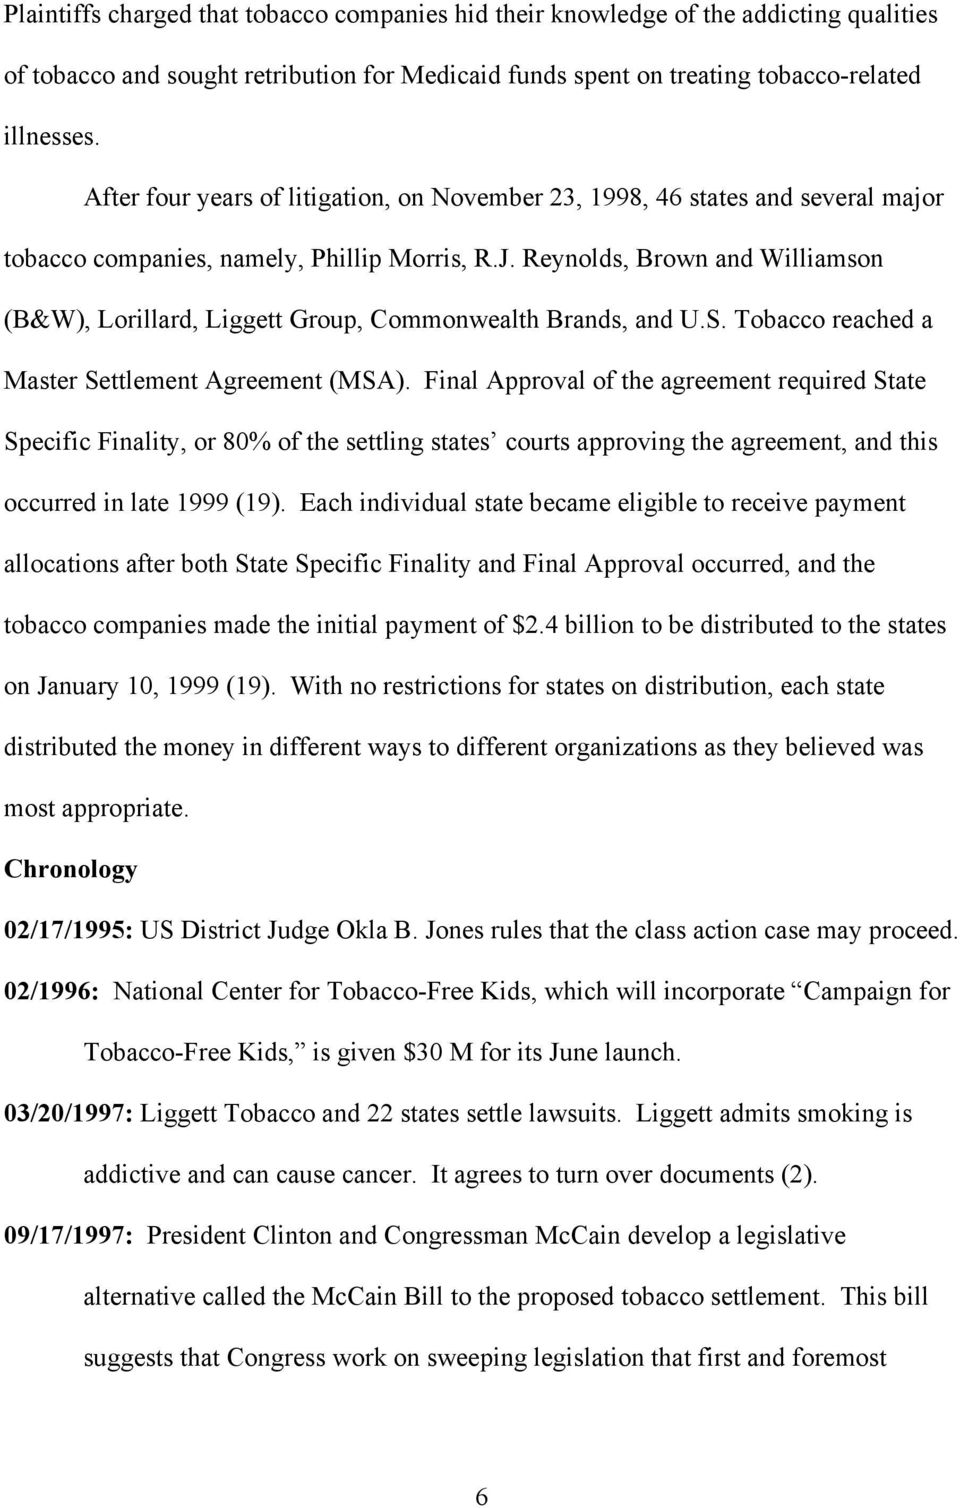 Reynolds, Brown and Williamson (B&W), Lorillard, Liggett Group, Commonwealth Brands, and U.S. Tobacco reached a Master Settlement Agreement (MSA).